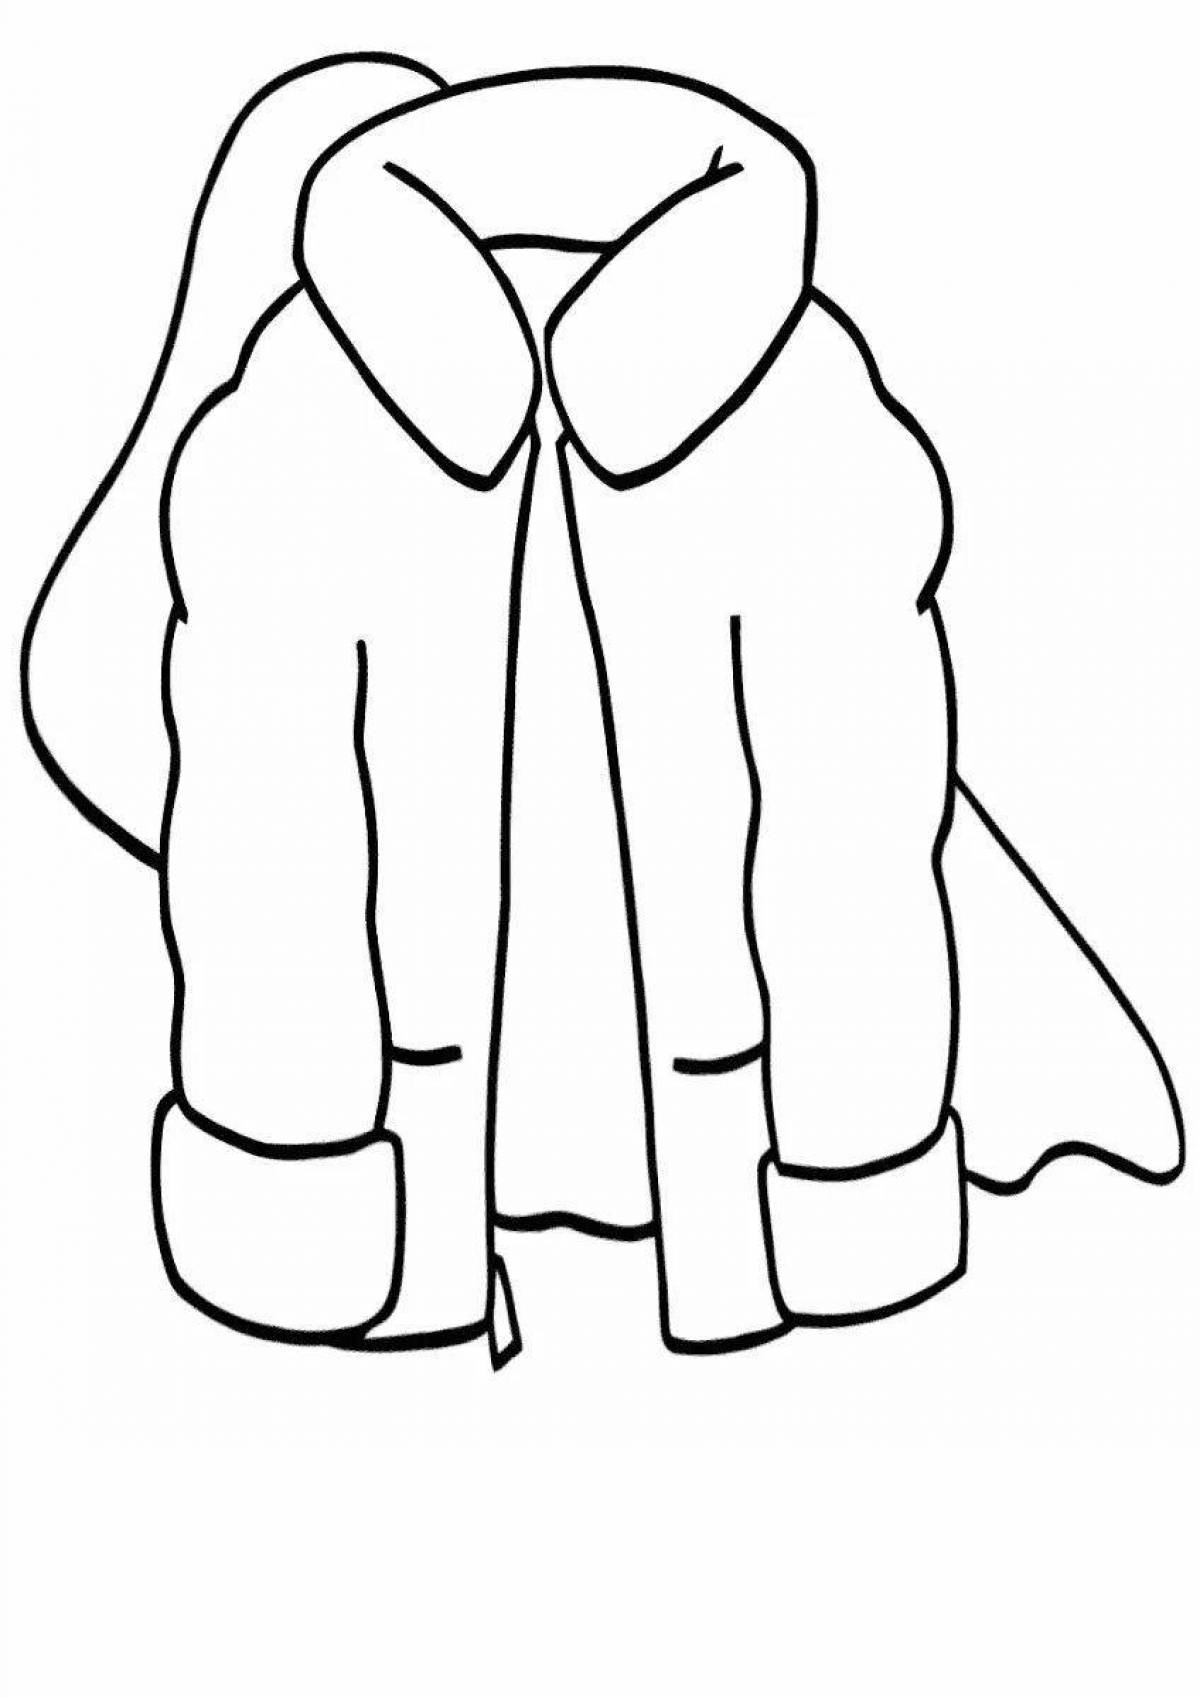 Coloring page charming outerwear